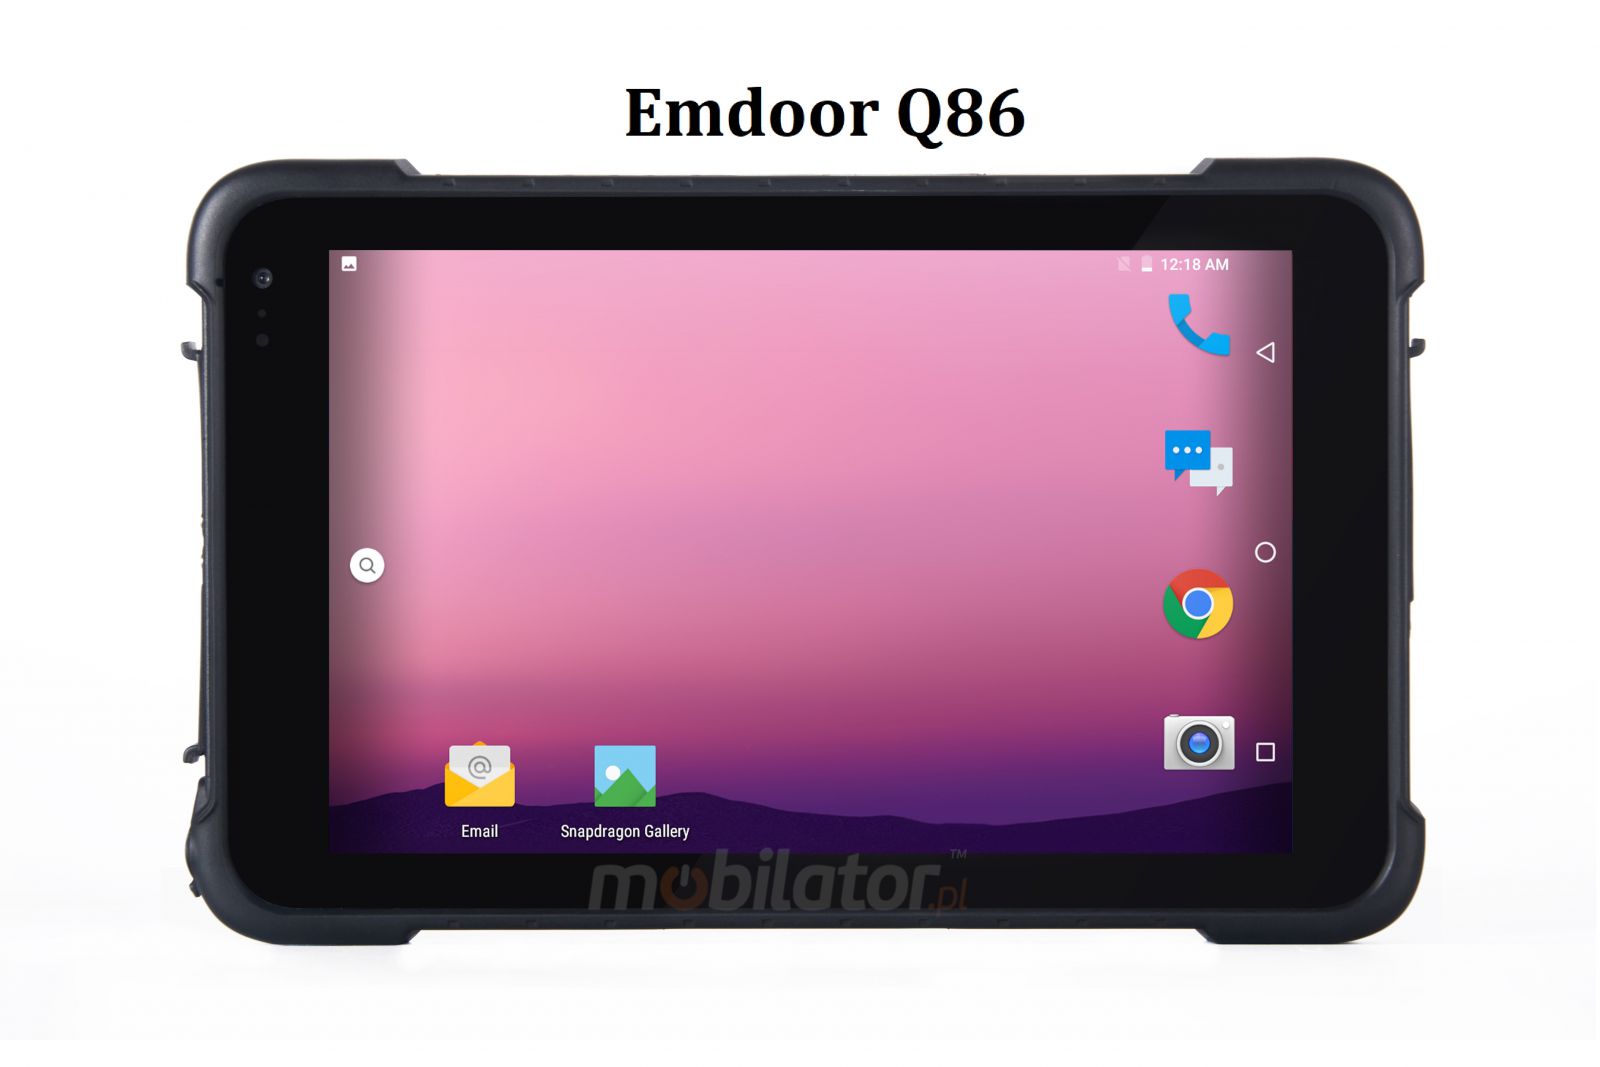 Industrial (IP67 + MIL-STD-810G) 8 inch tablet with 4GB RAM, 64GB ROM, Bluetooth and NFC - Emdoor Q86 v.1 